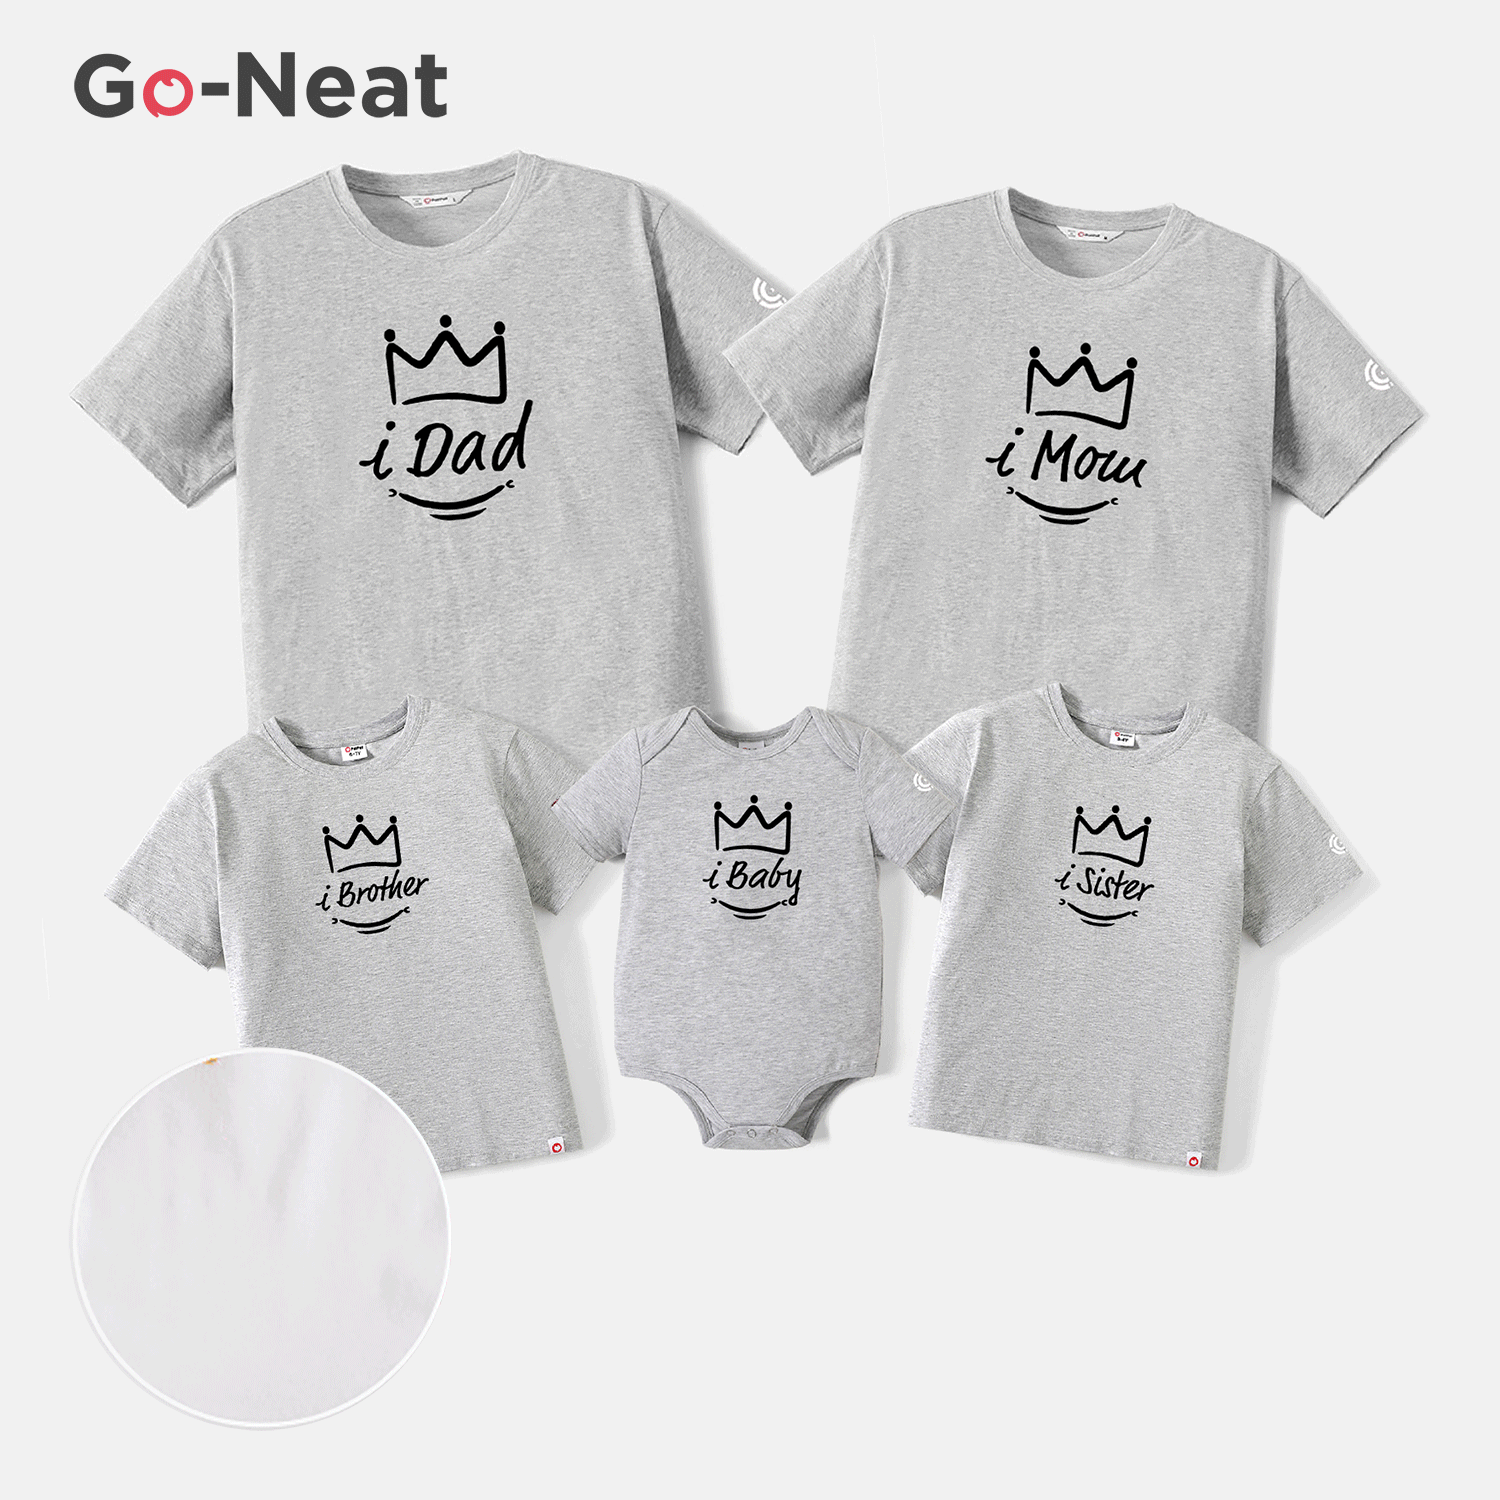 Go-Neat Water Repellent and Stain Resistant Sibling Matching Letter Print Short-sleeve Tee